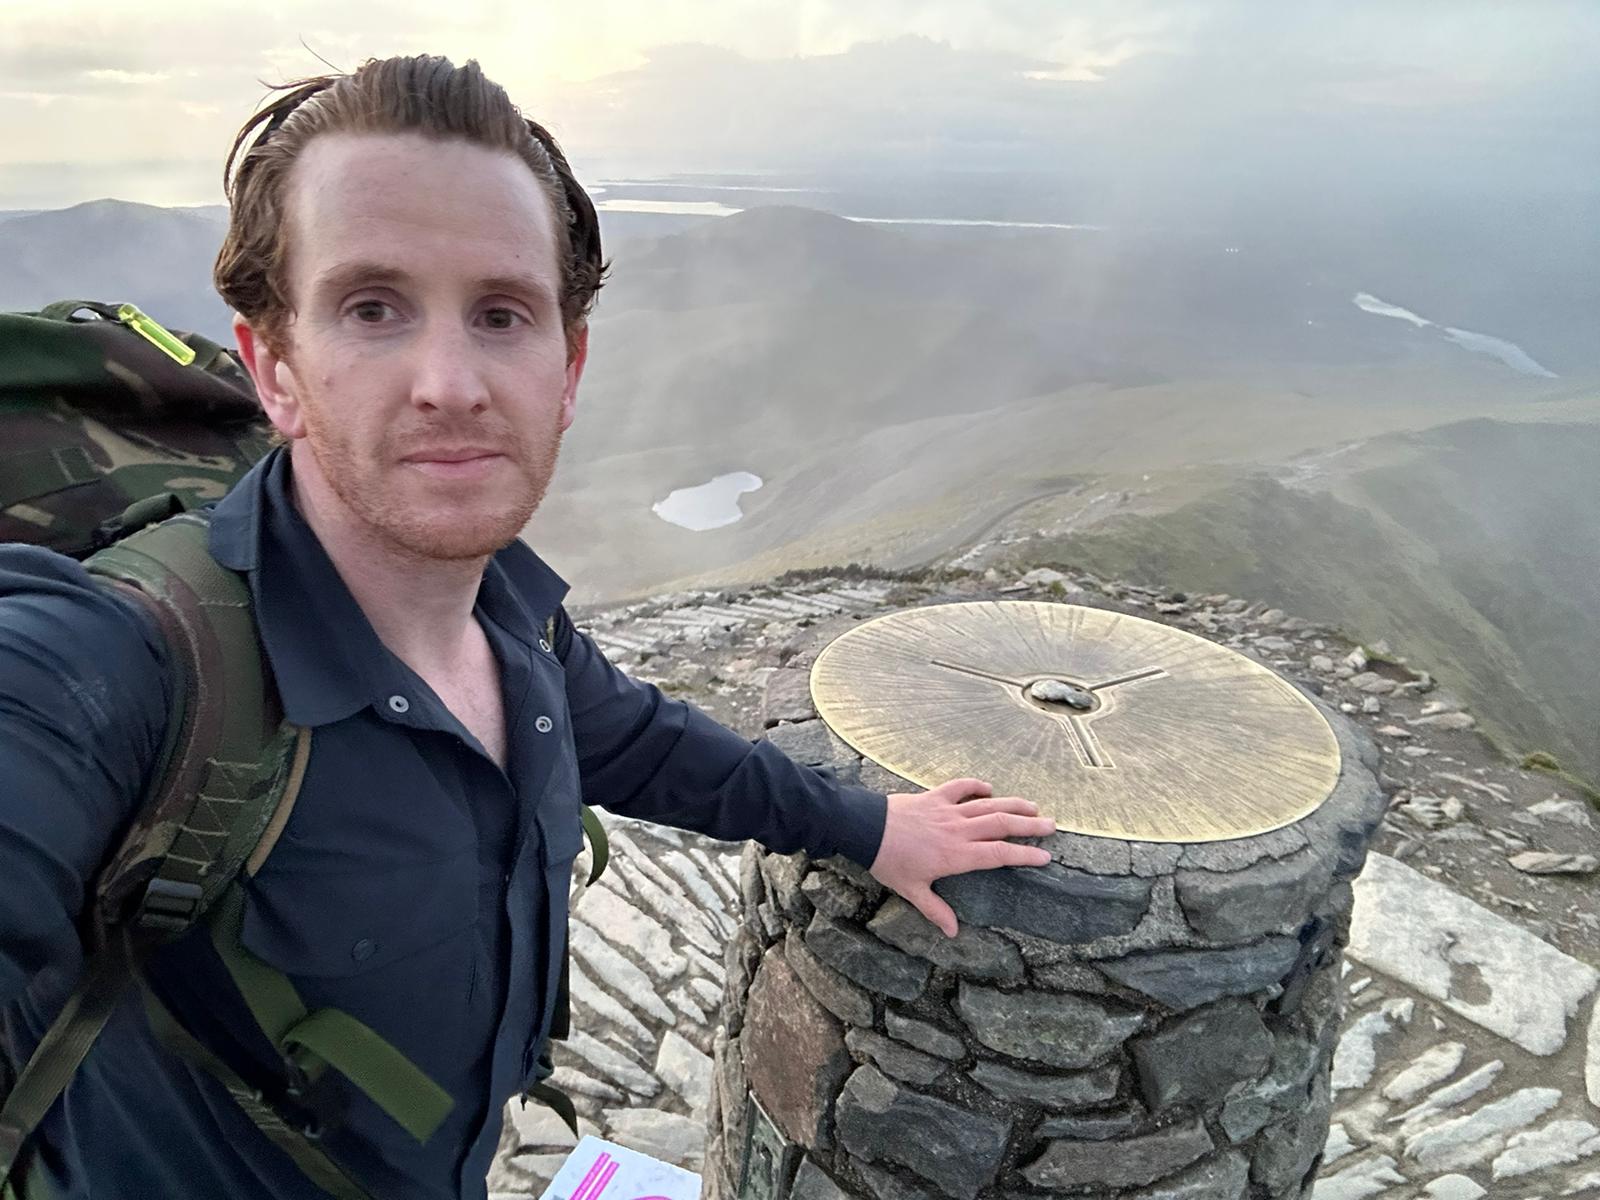 Firefighter climbs Snowdon 9 times in 48 hours